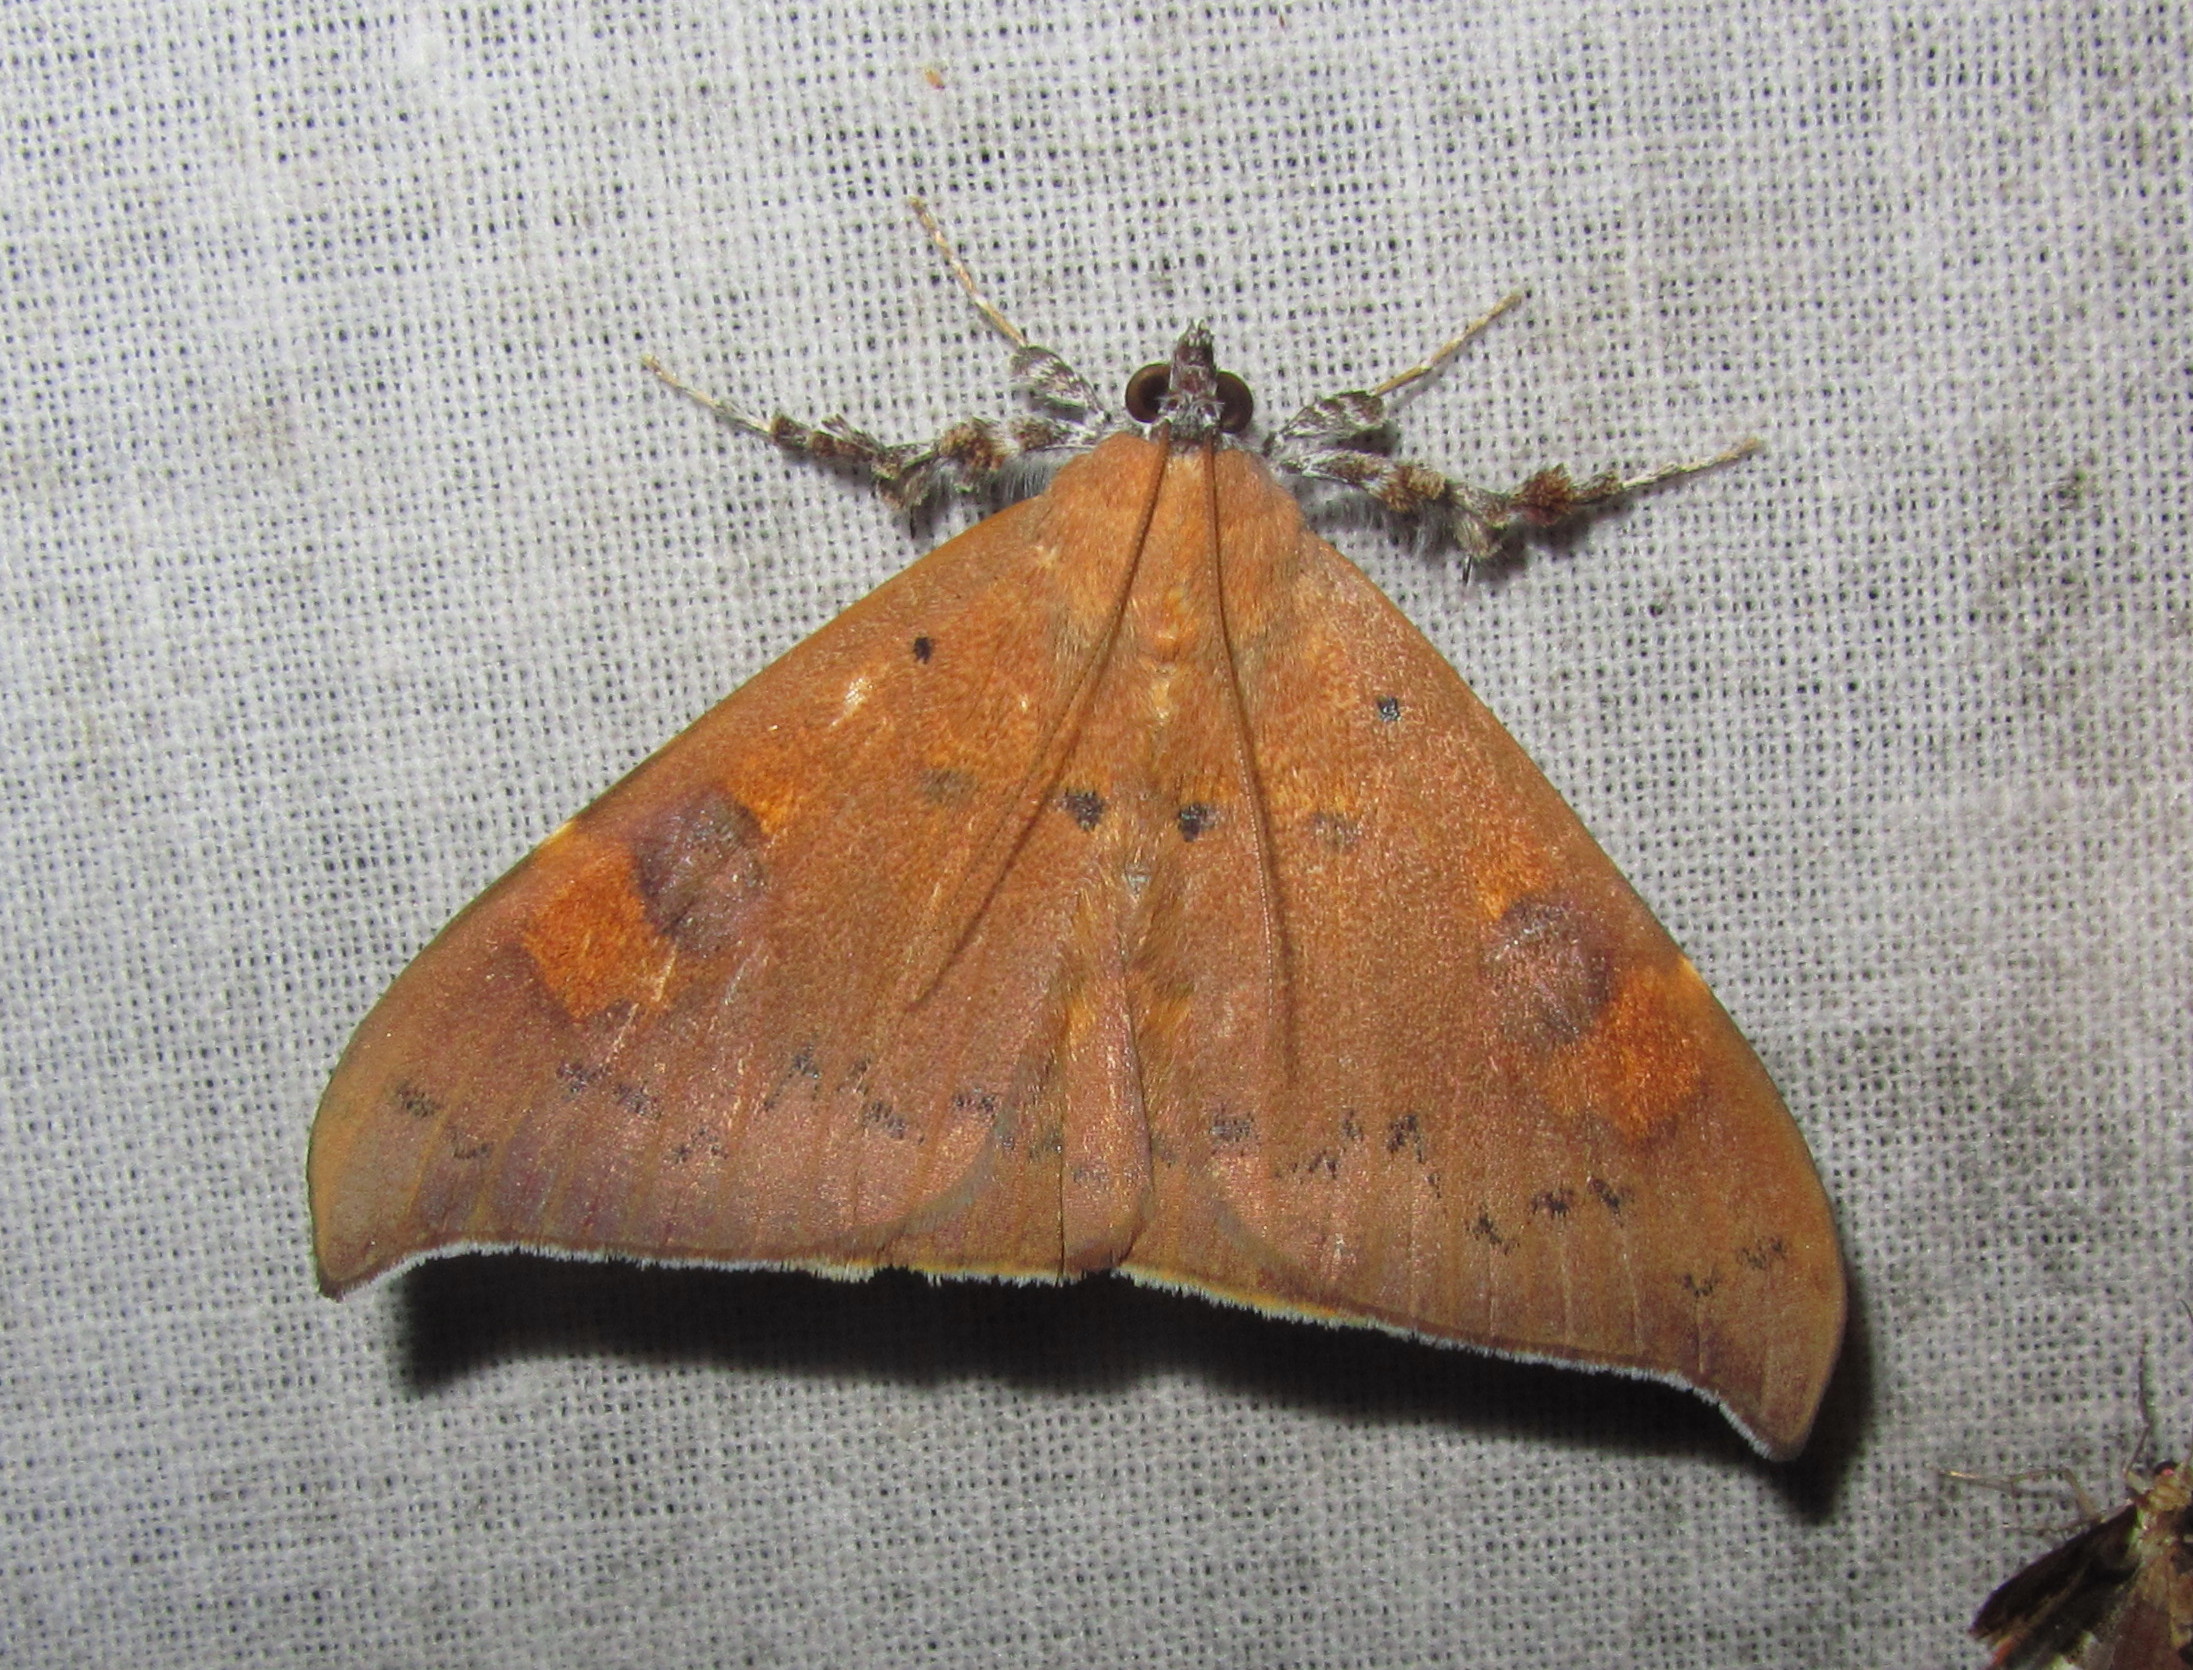 a moth on the surface that is very brown